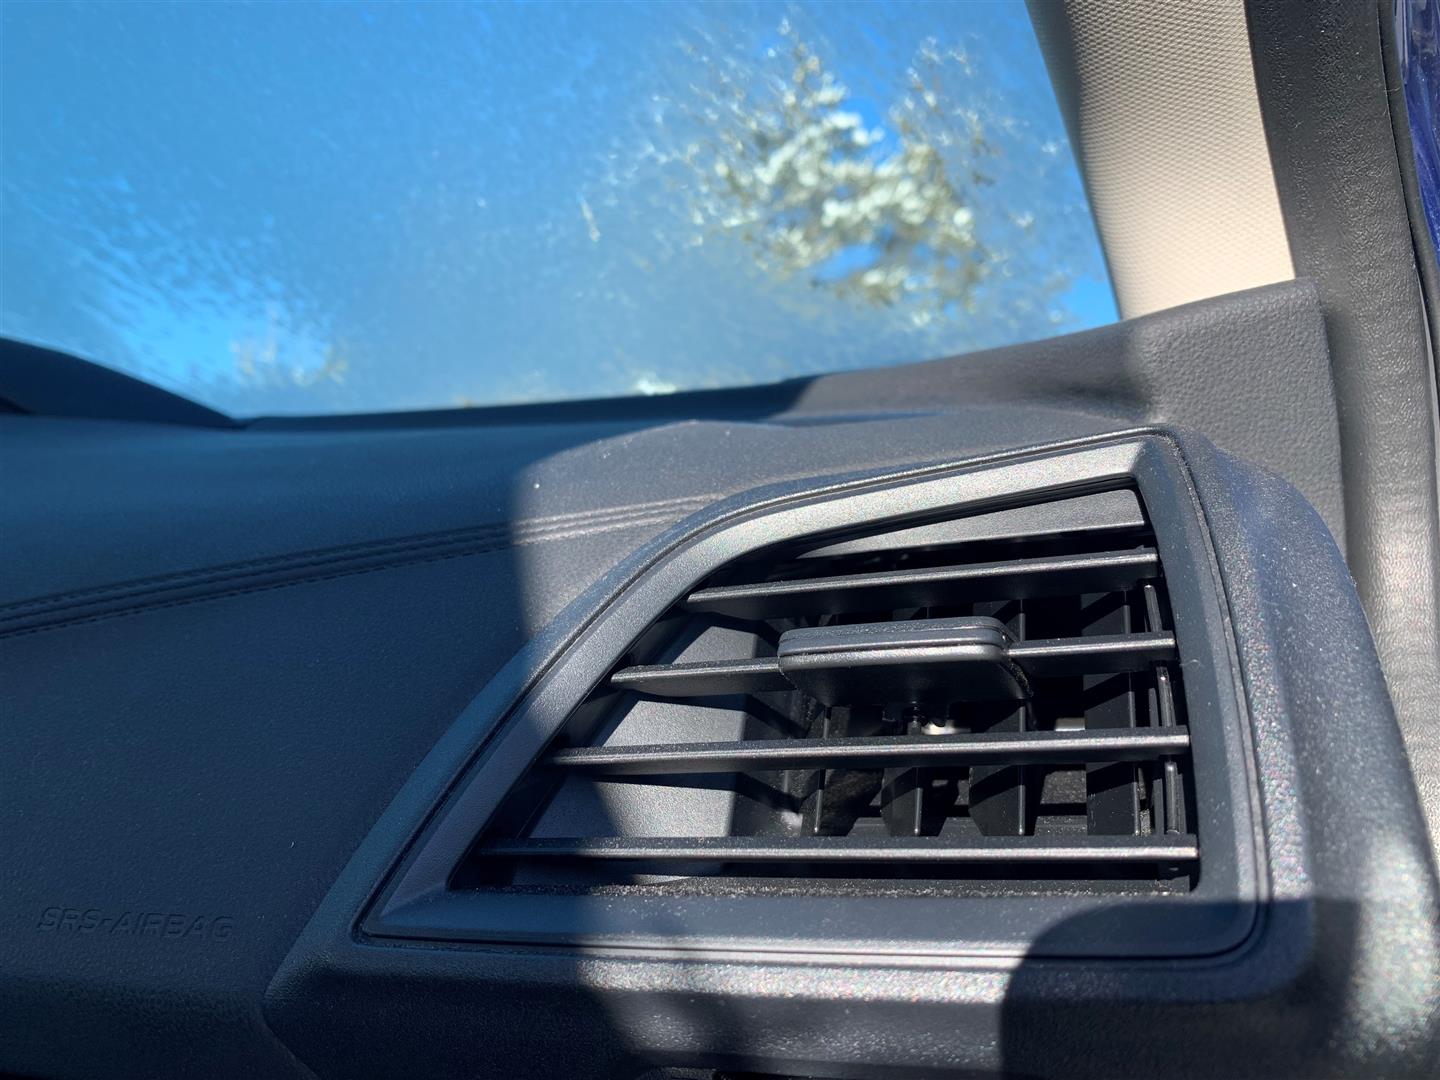 Why Is My Car Heater Blowing Cold Air? — Now from Nationwide